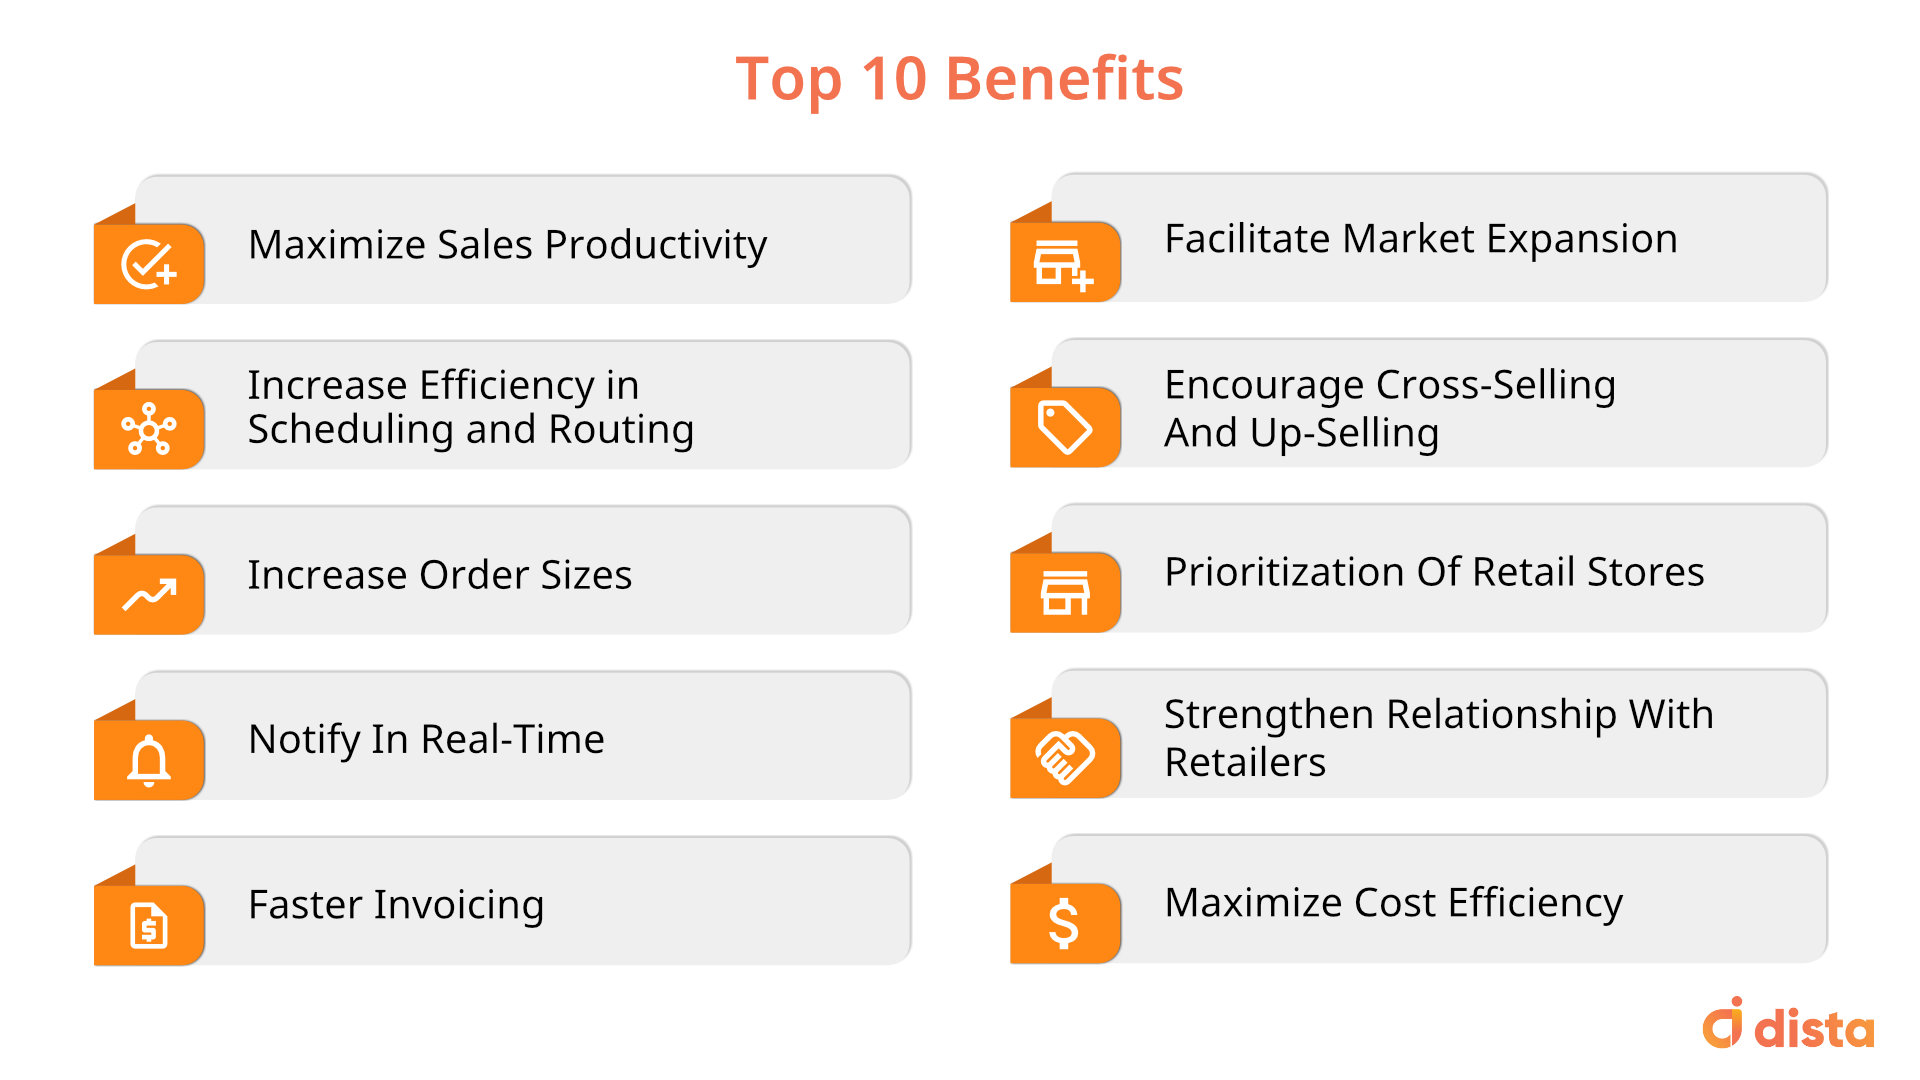 Top 10 Benefits of Field Sales Software for FMCG Companies